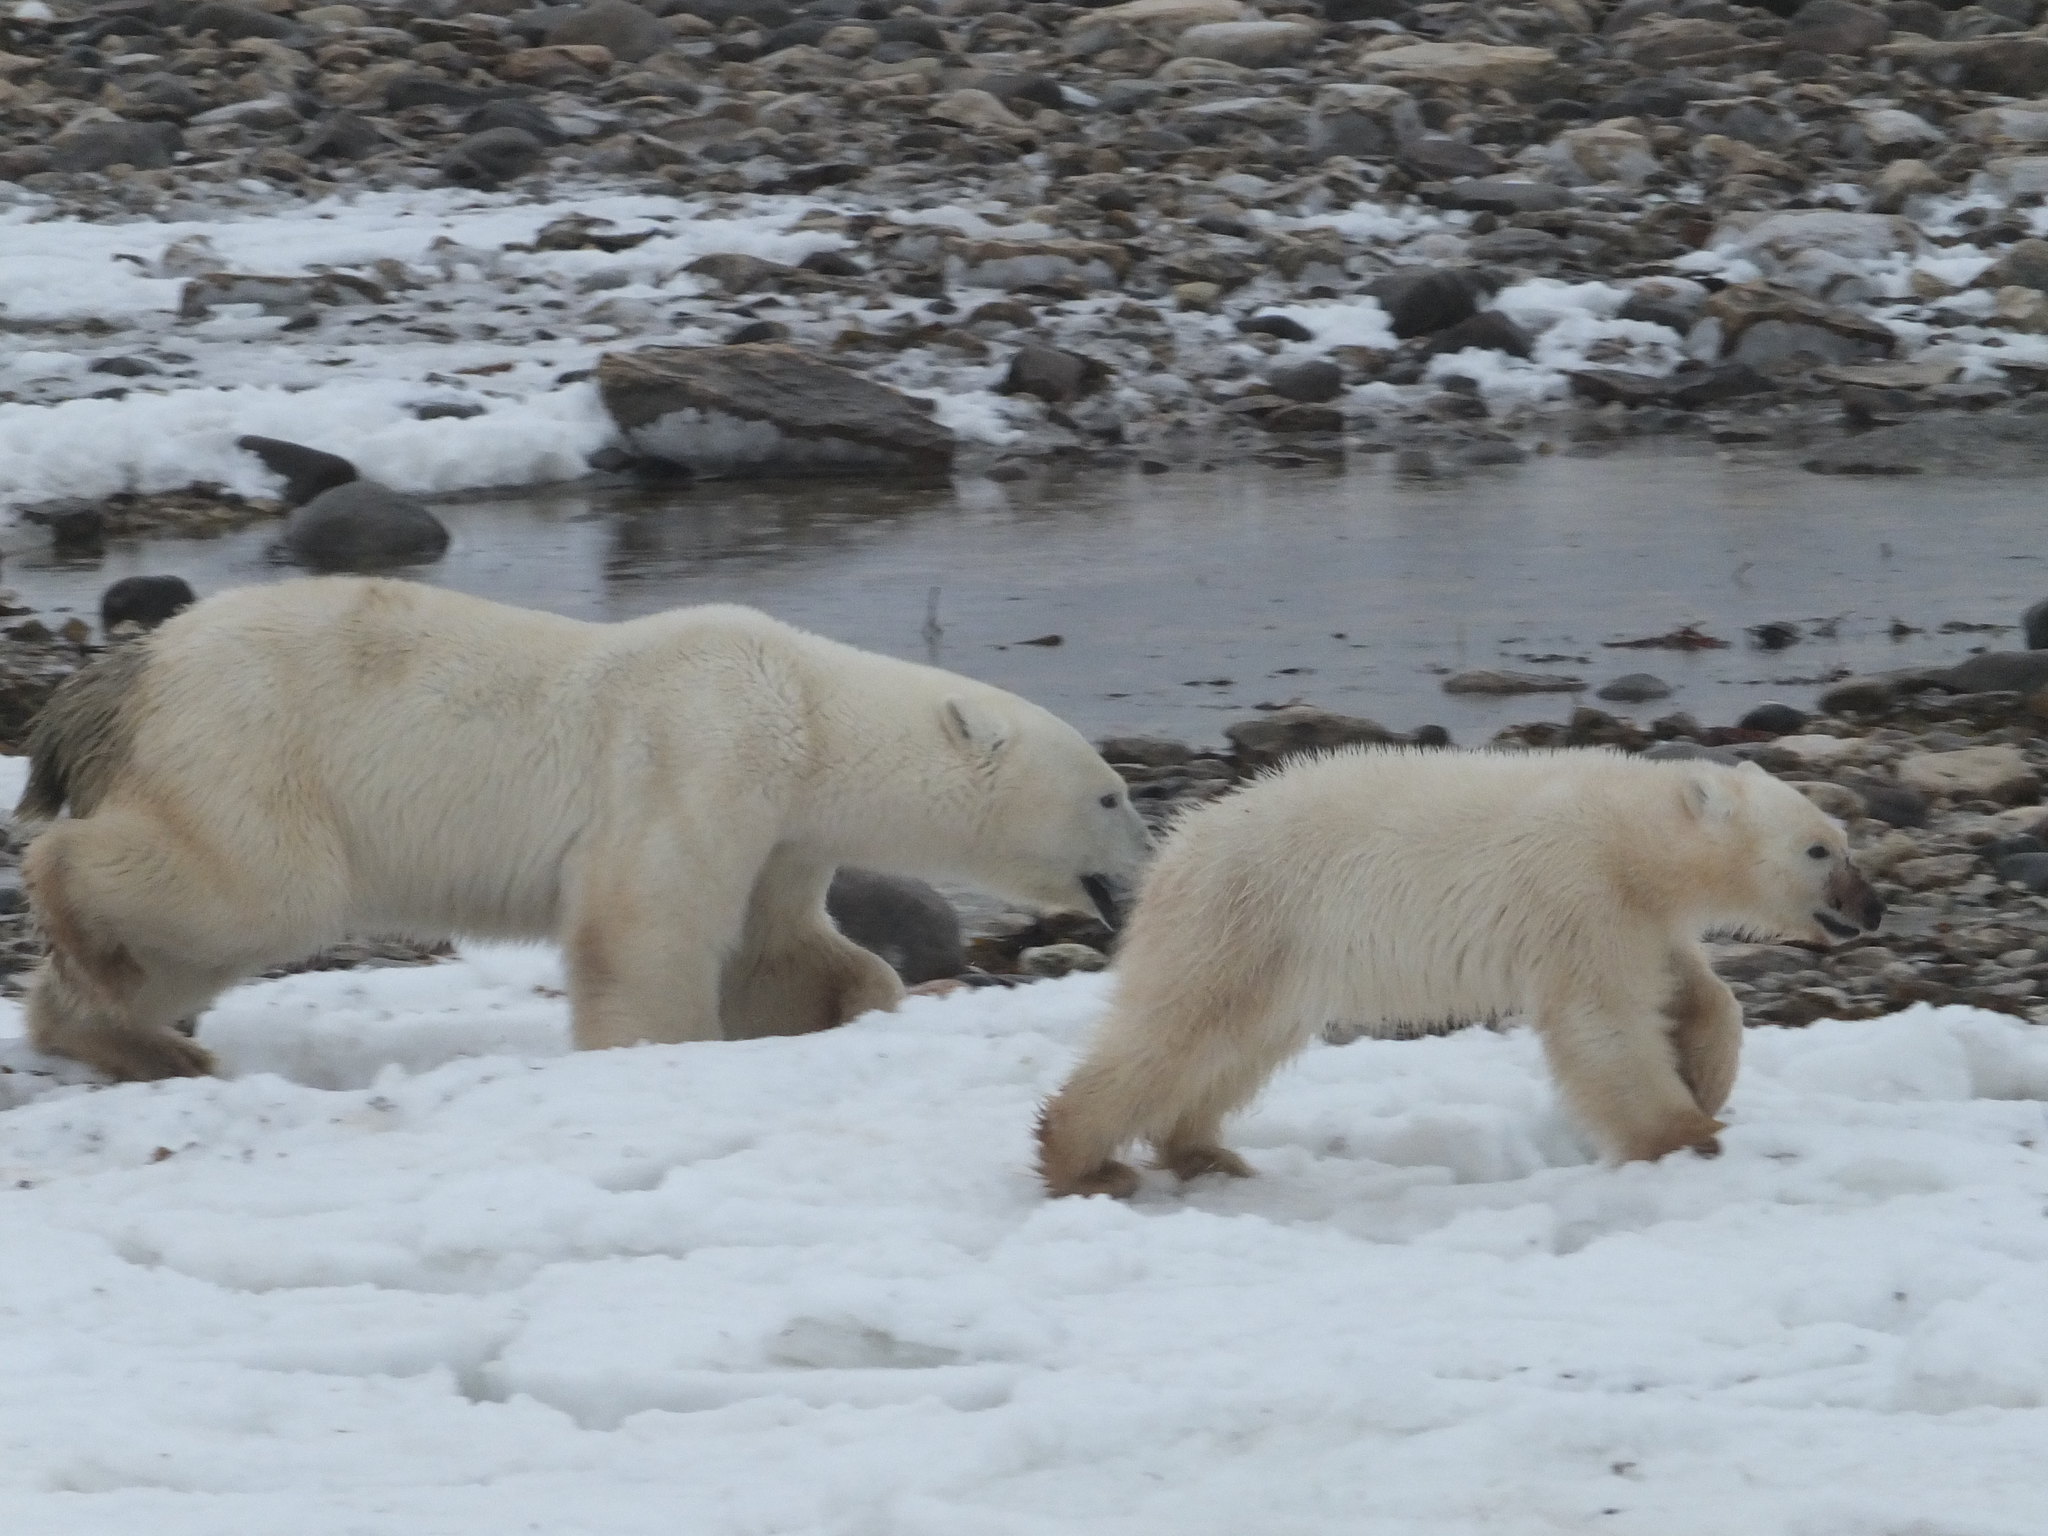 A mother bear and her cub running on snow and rocks